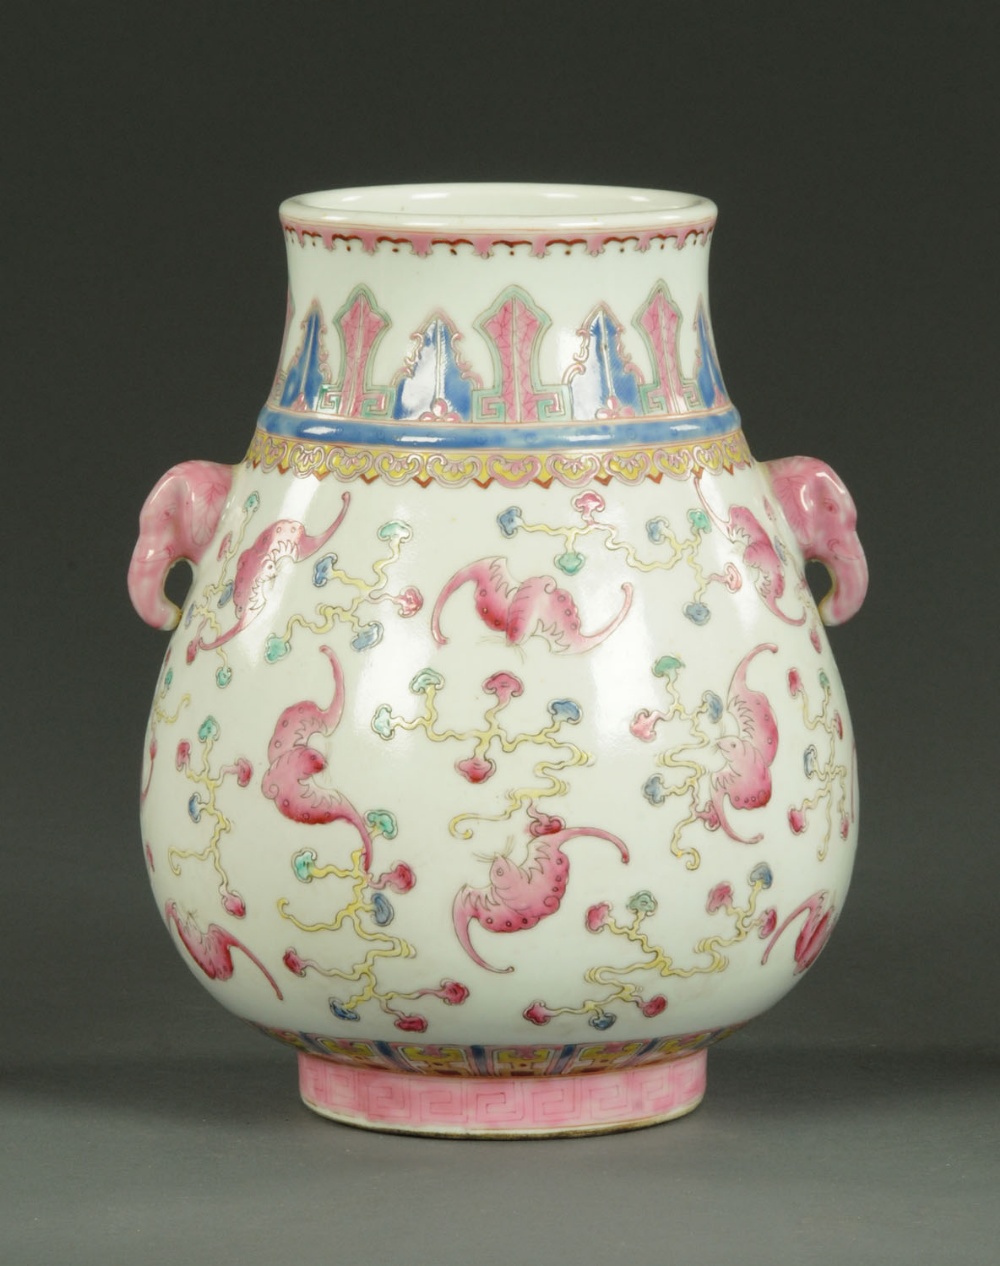 A Chinese Famille Rose vase, with elephant mask handles, the body decorated with flying bats,